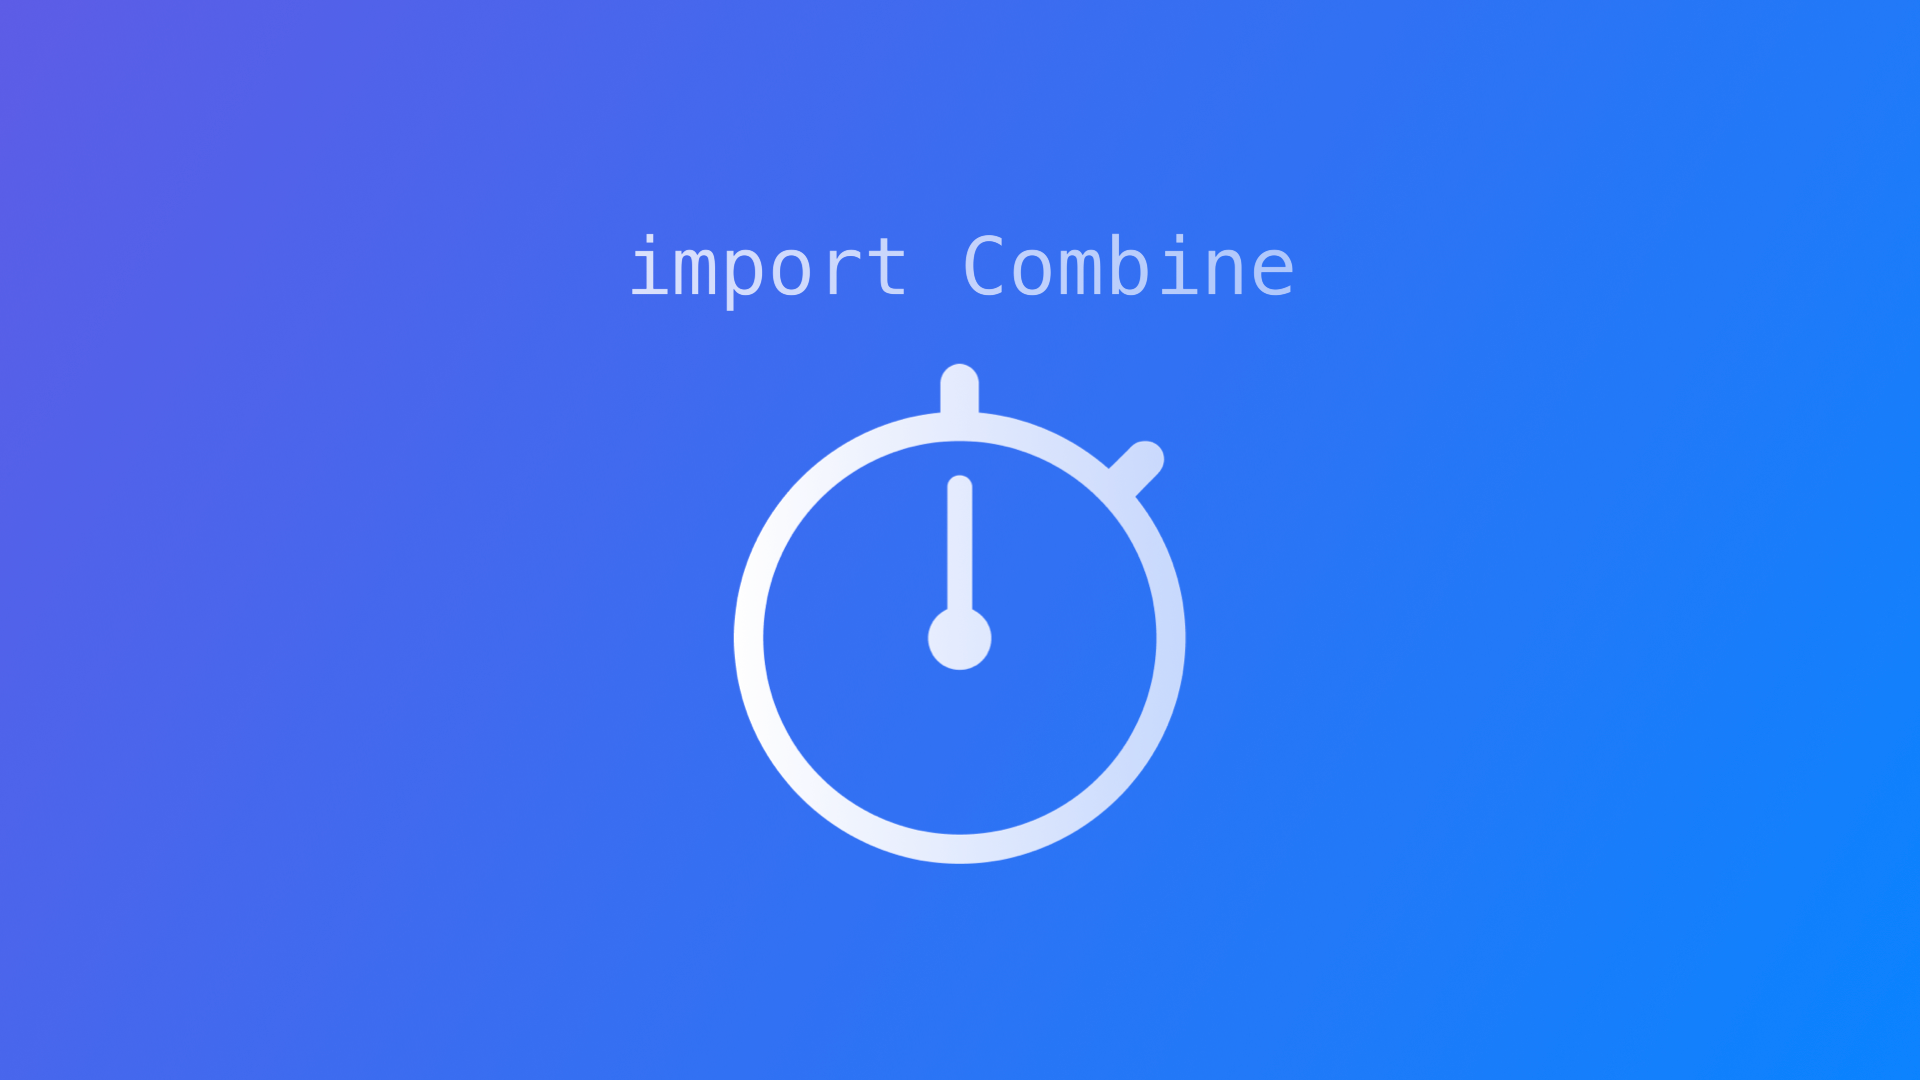 Combine: Working with Timers